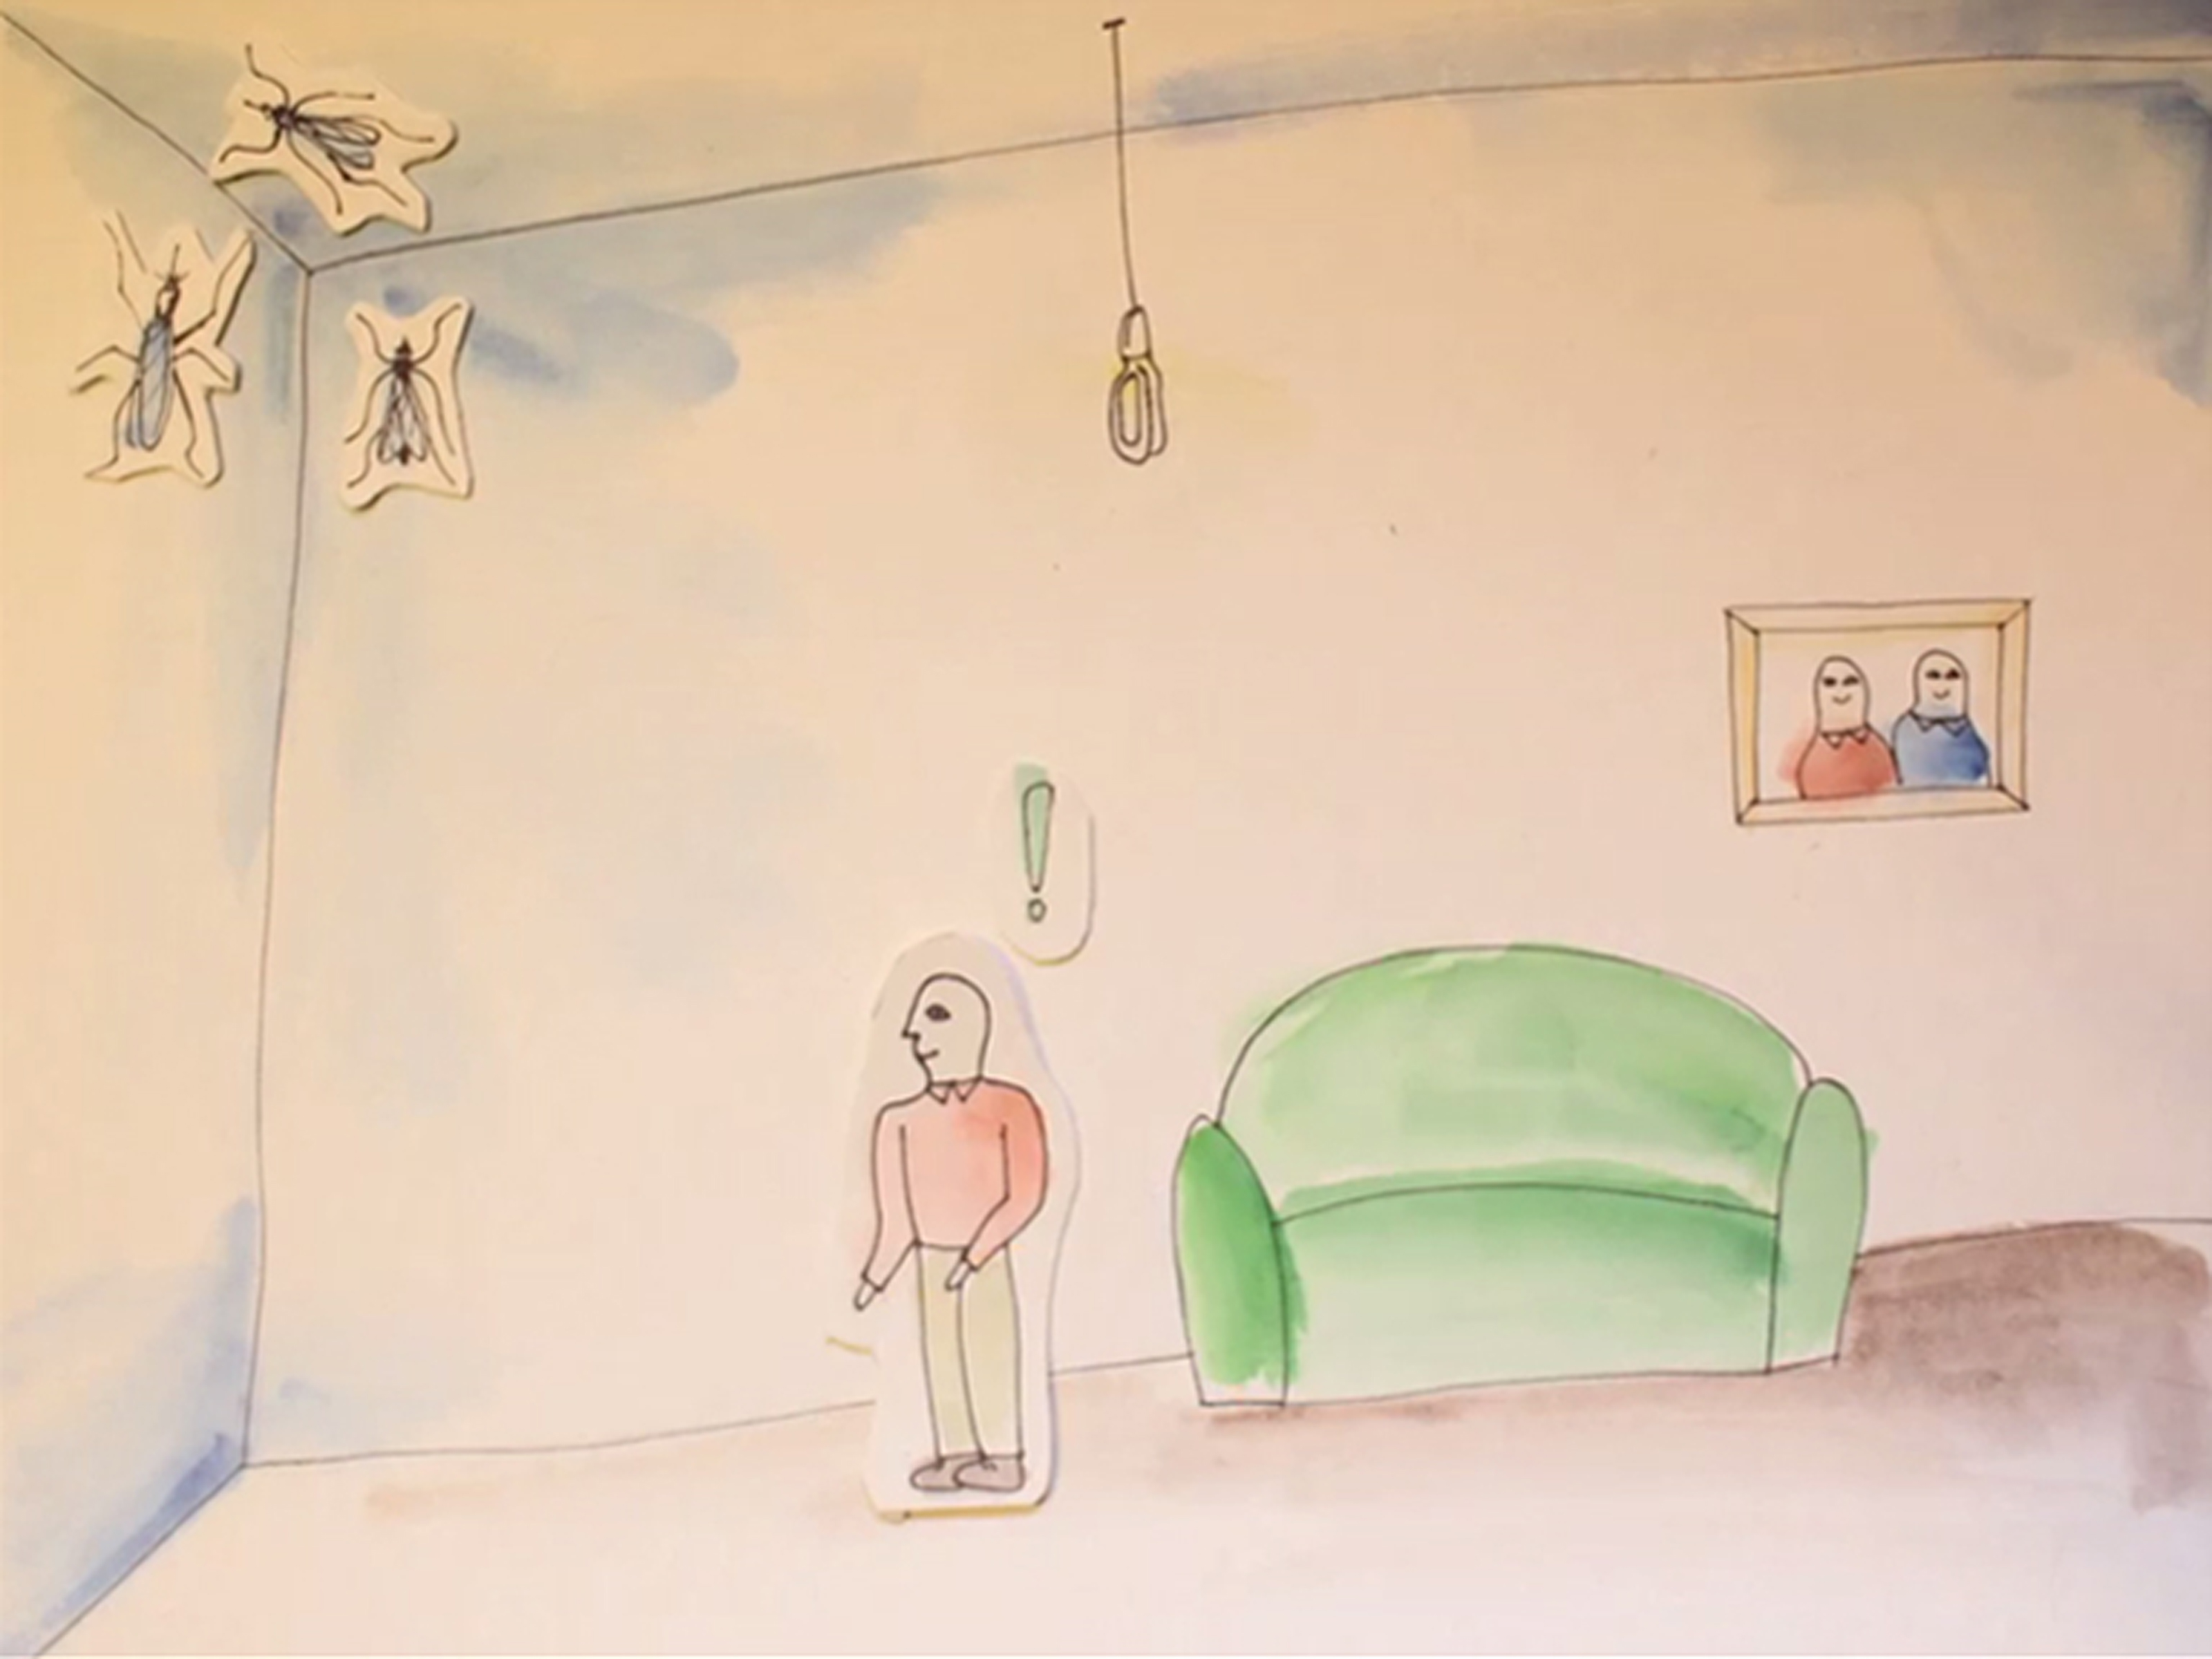 A drawing of a man discovering mosquitos in the ceiling corner of the room